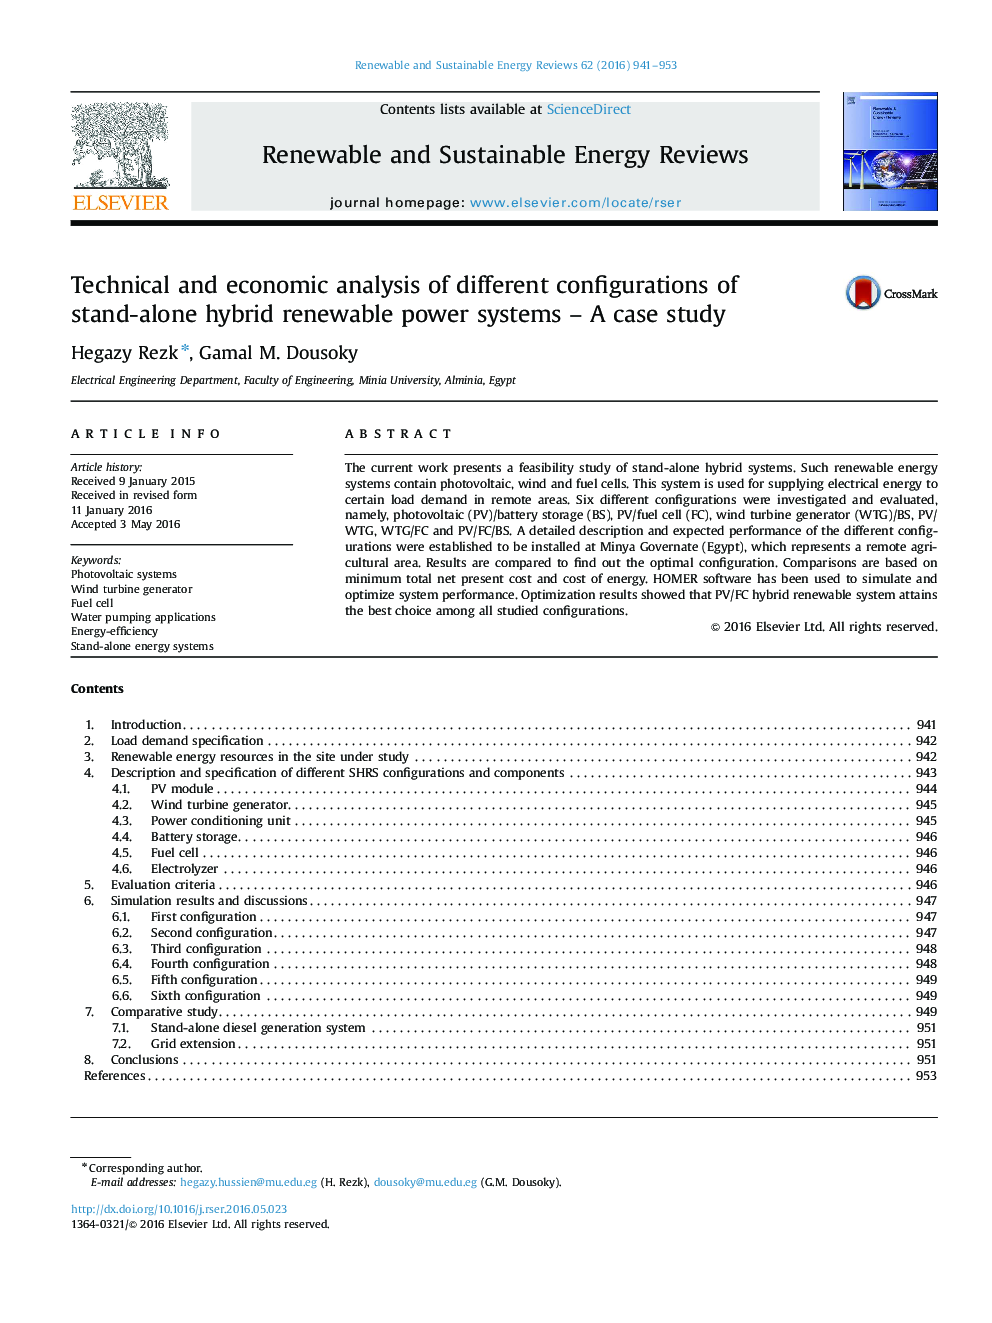 Technical and economic analysis of different configurations of stand-alone hybrid renewable power systems - A case study